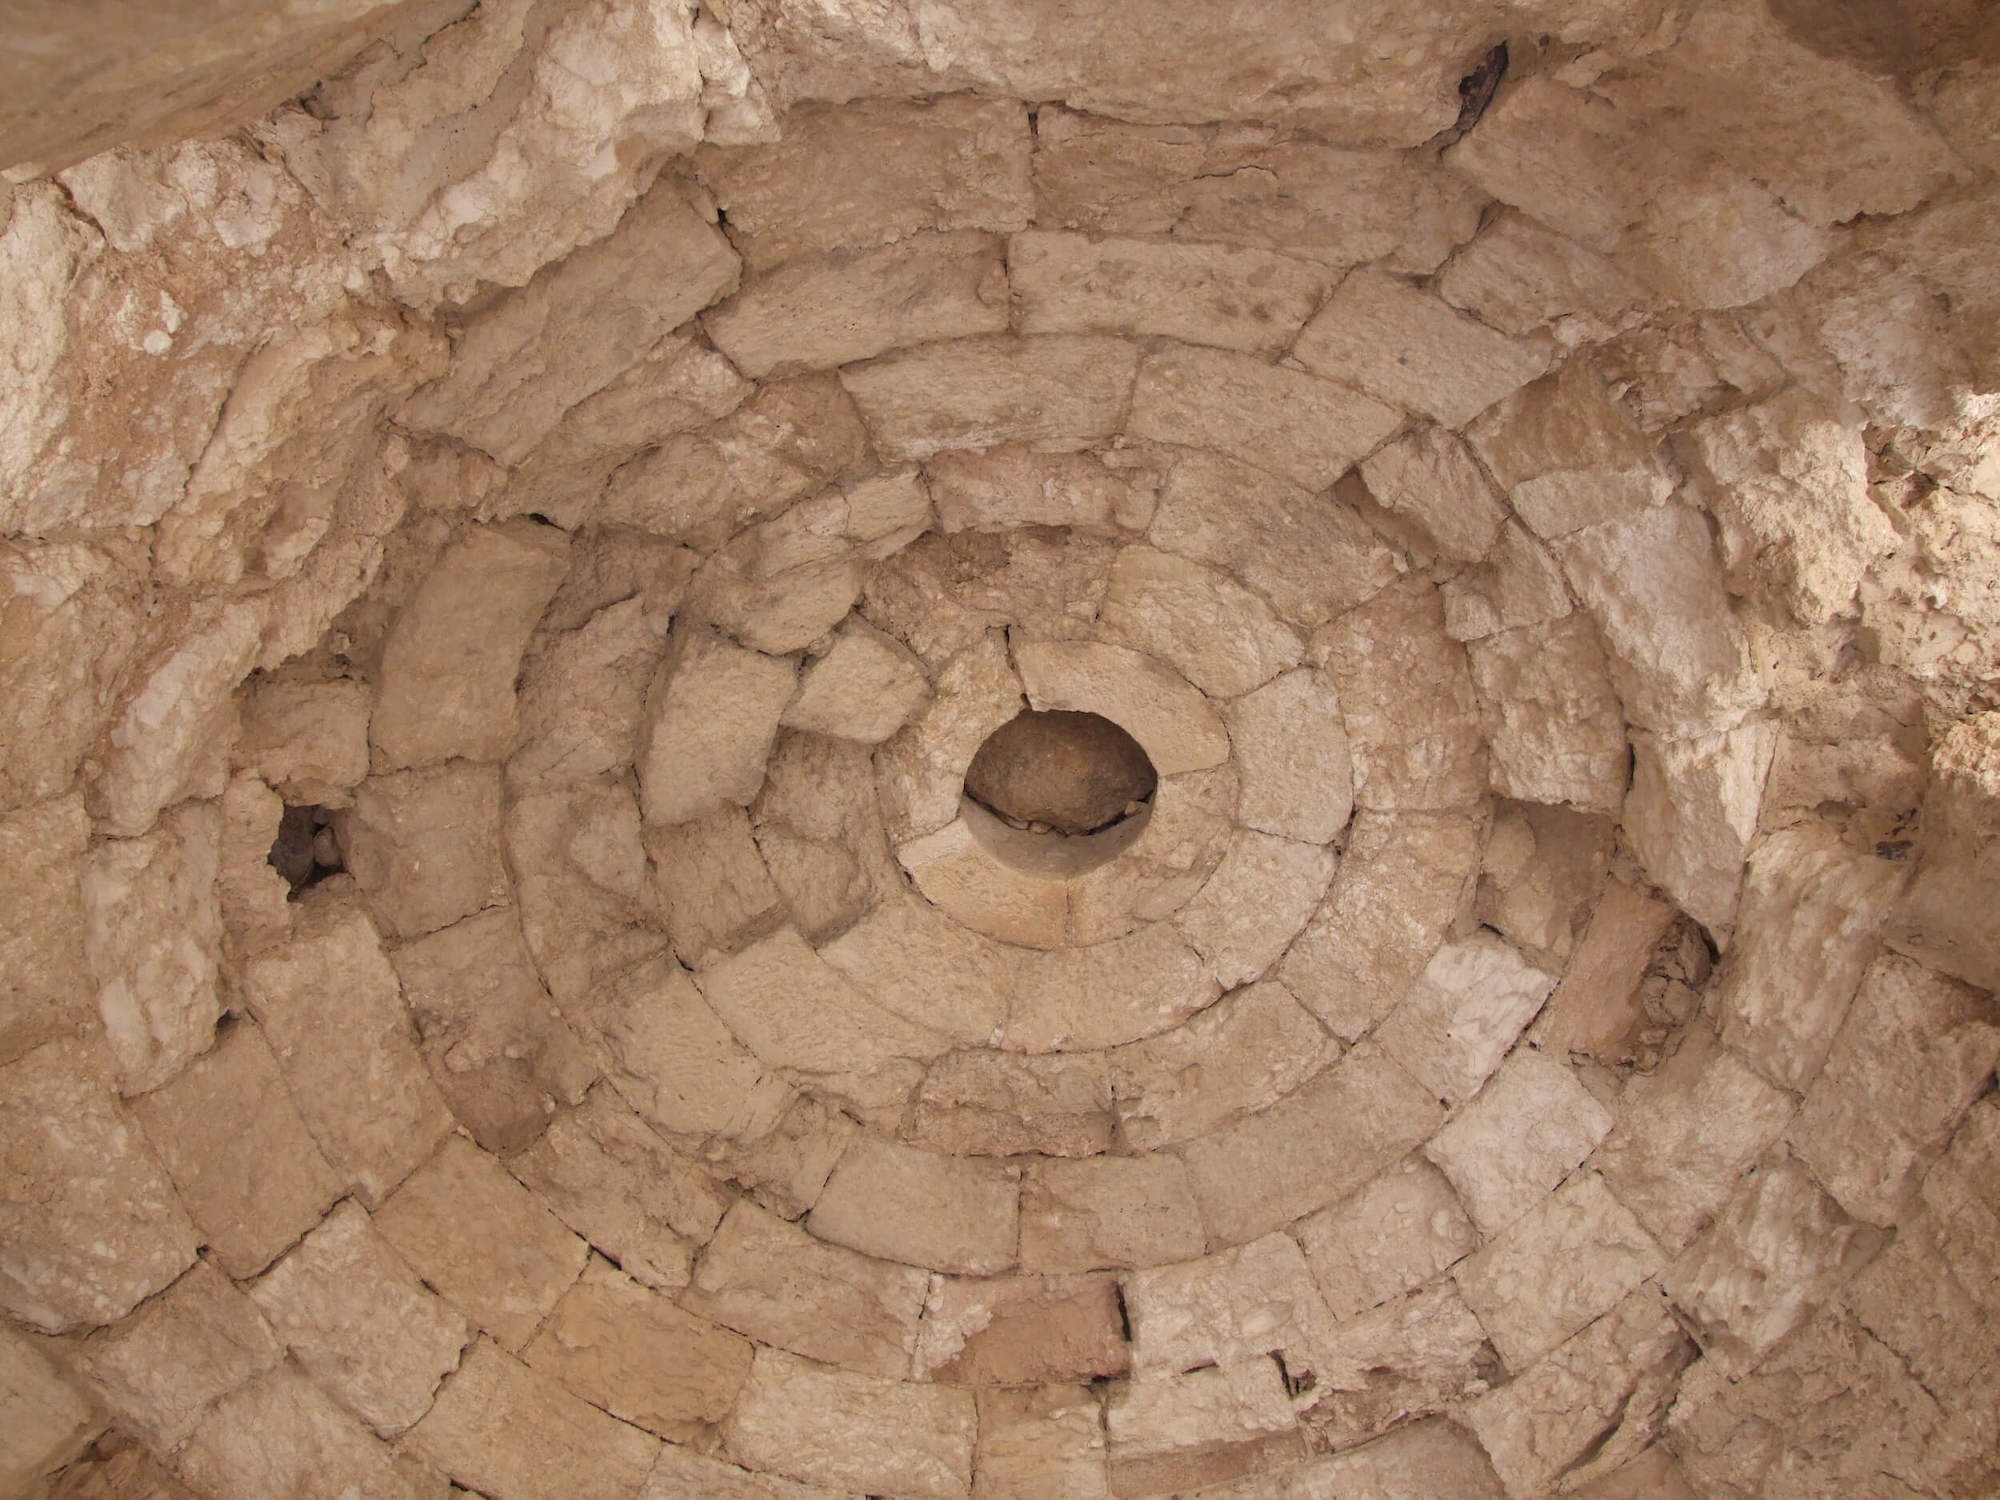 Figure 3: The ashlar dome of the tepidarium of Herod’s palace-fortress baths at Herodion (credit: Michael Eisenberg)